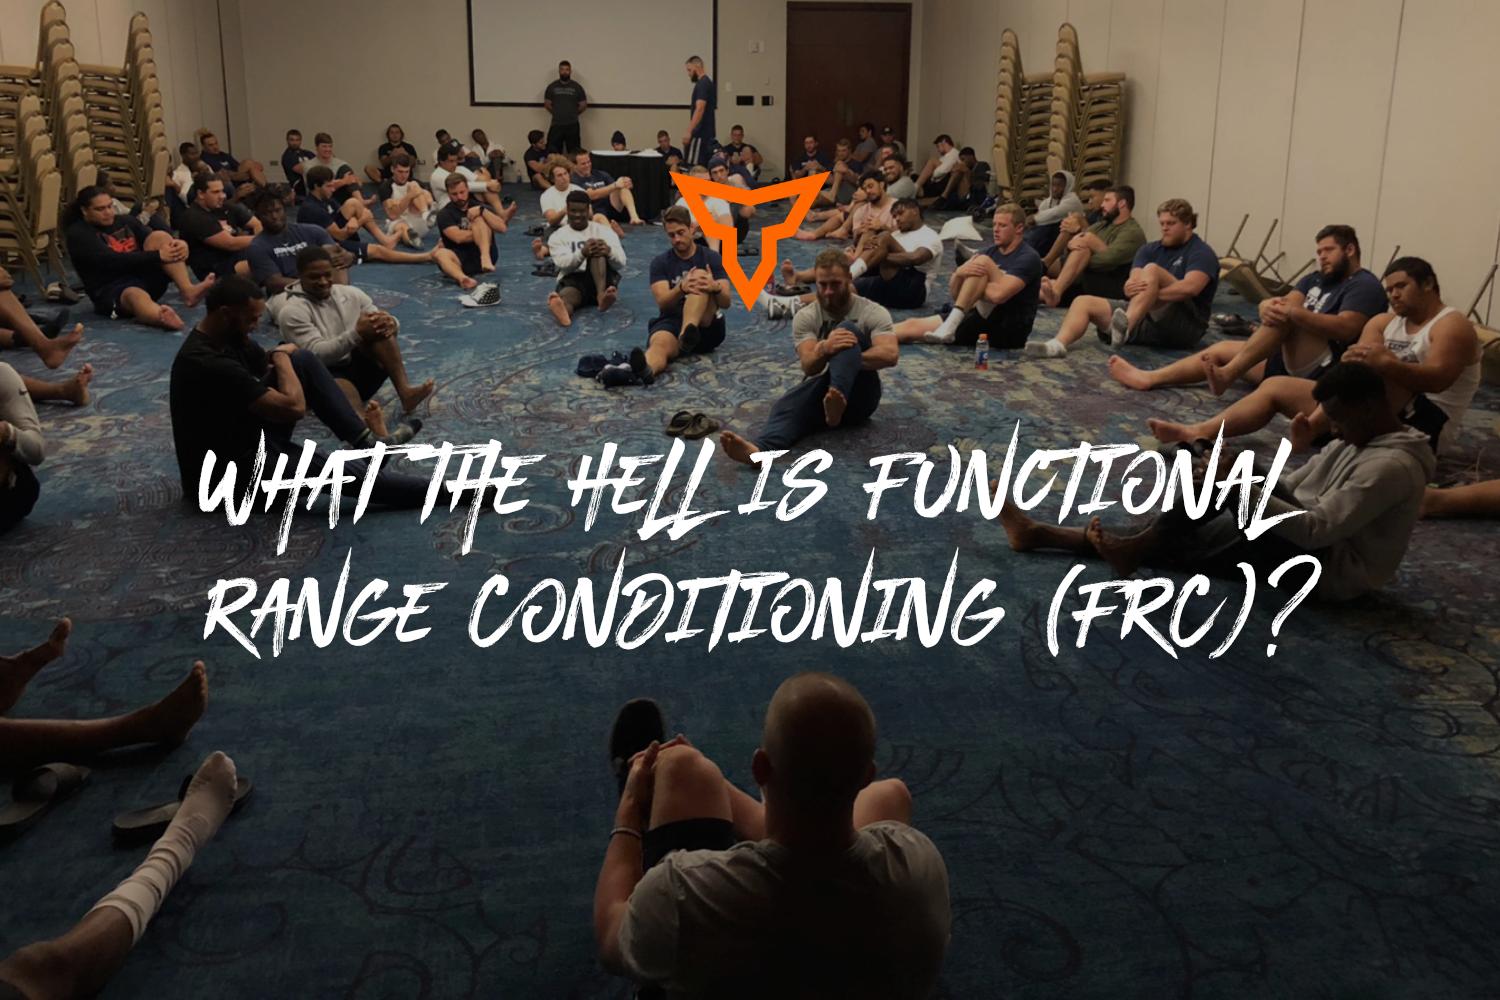 It #39 s Time to Learn What the Hell is Functional Range Conditioning (FRC)